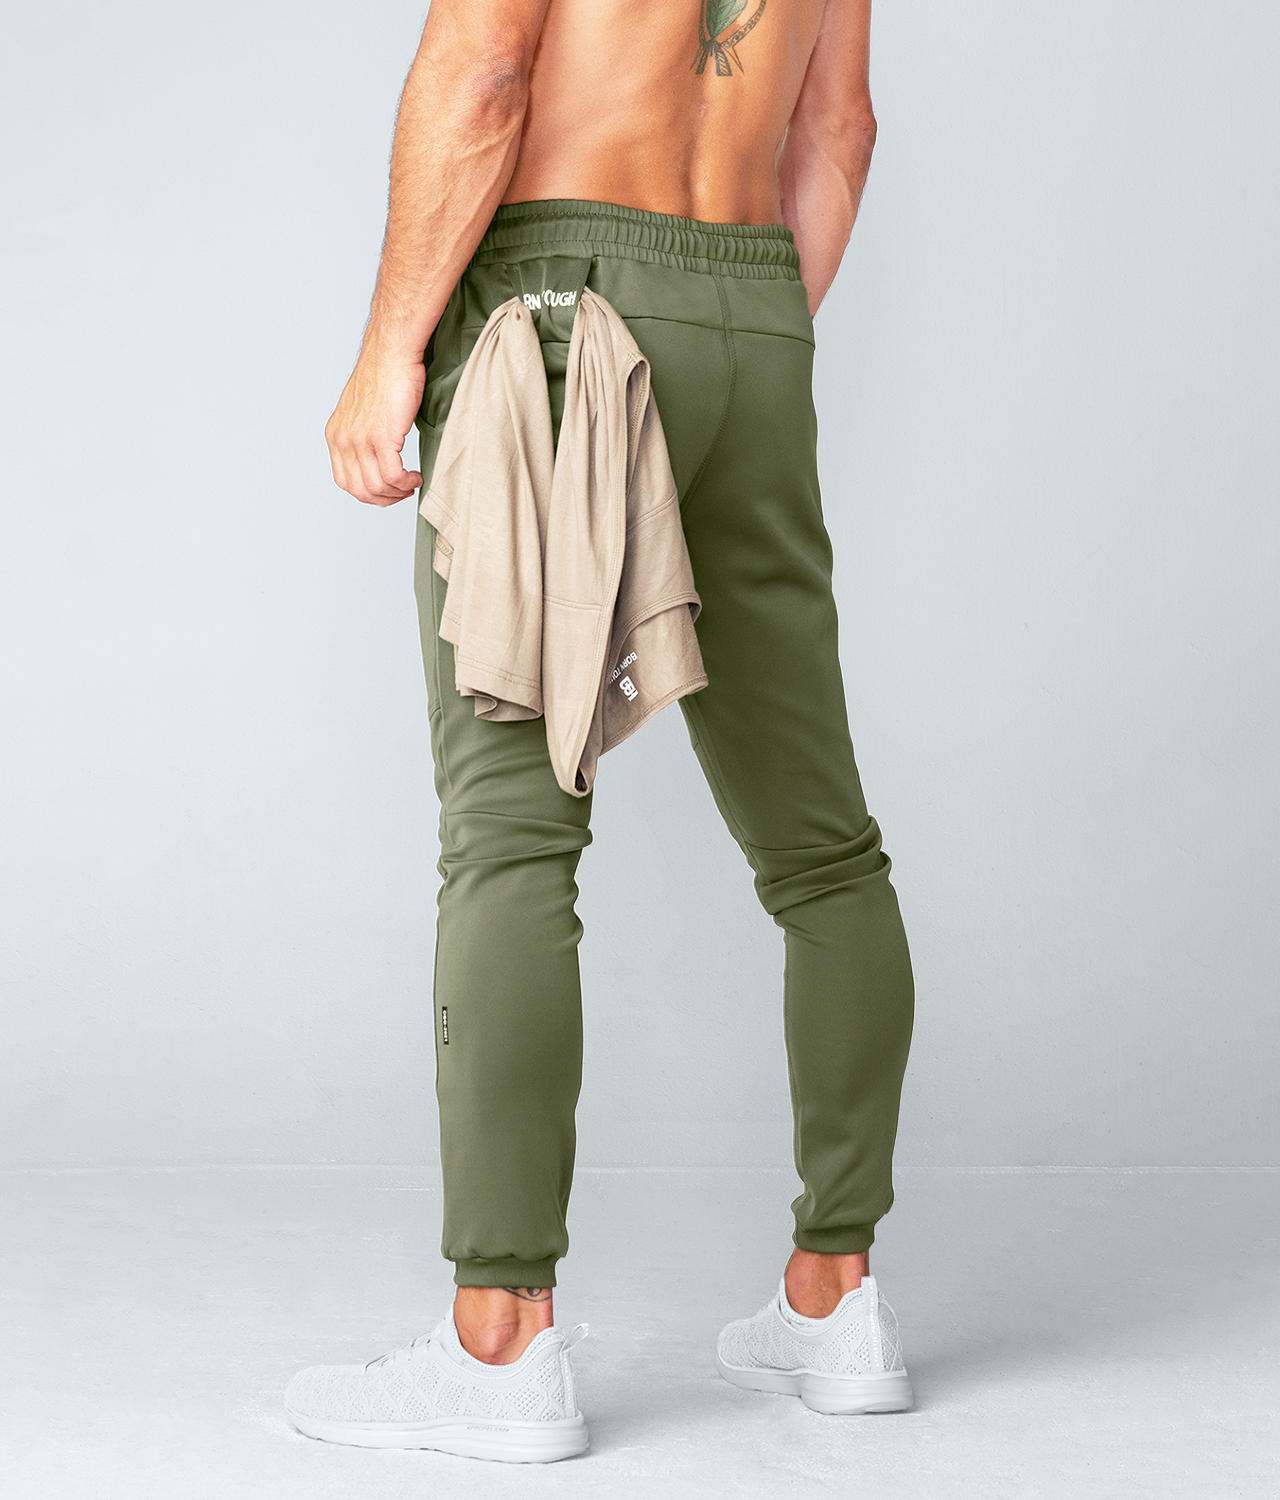 Womens Olive Green Joggers Pants | Like Lululemon – MomMe and More